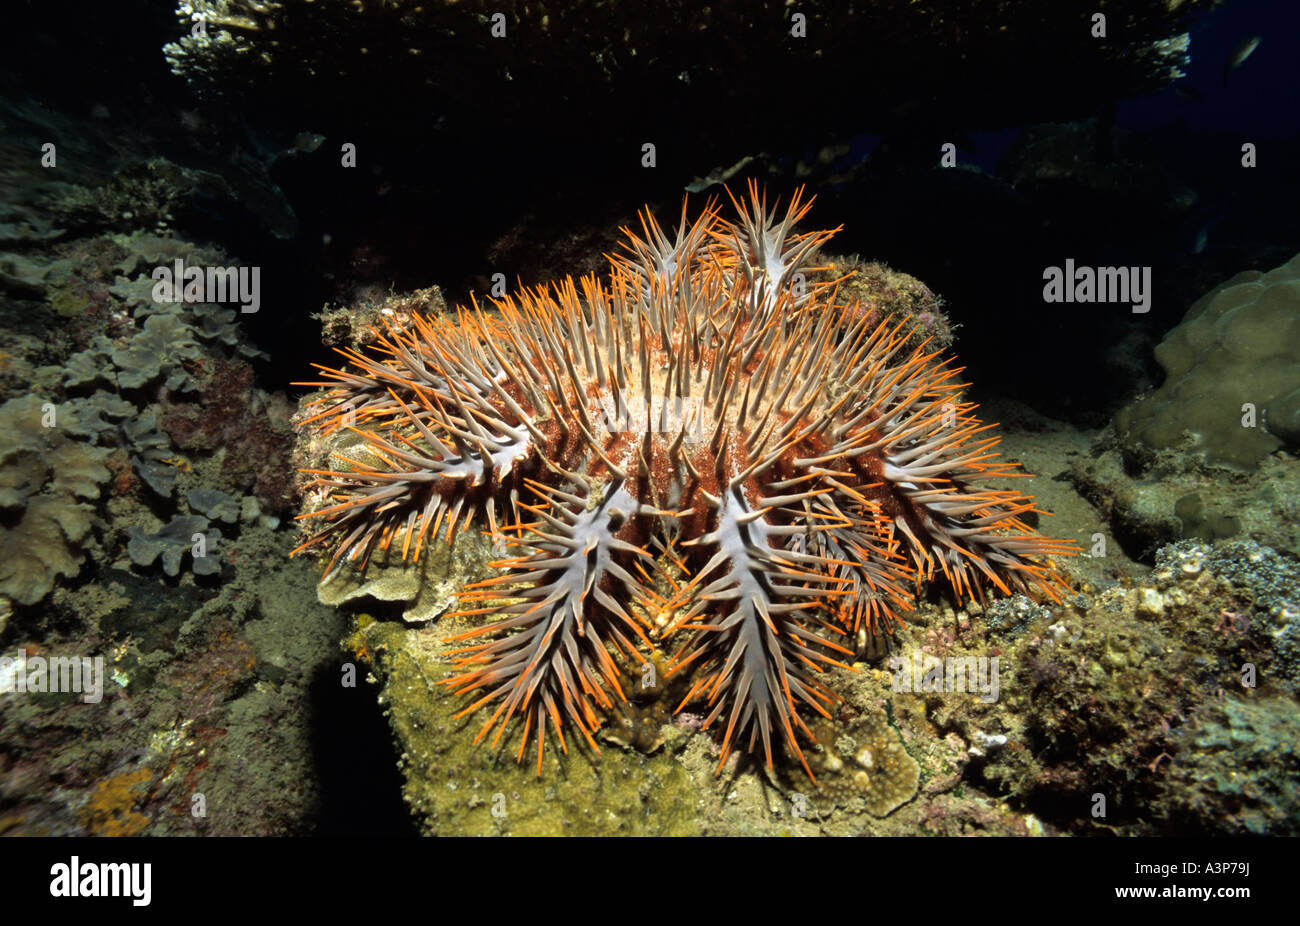 Crown of Thorns Starfish Acanthaster planci Perhentian Island Malaysia Stock Photo